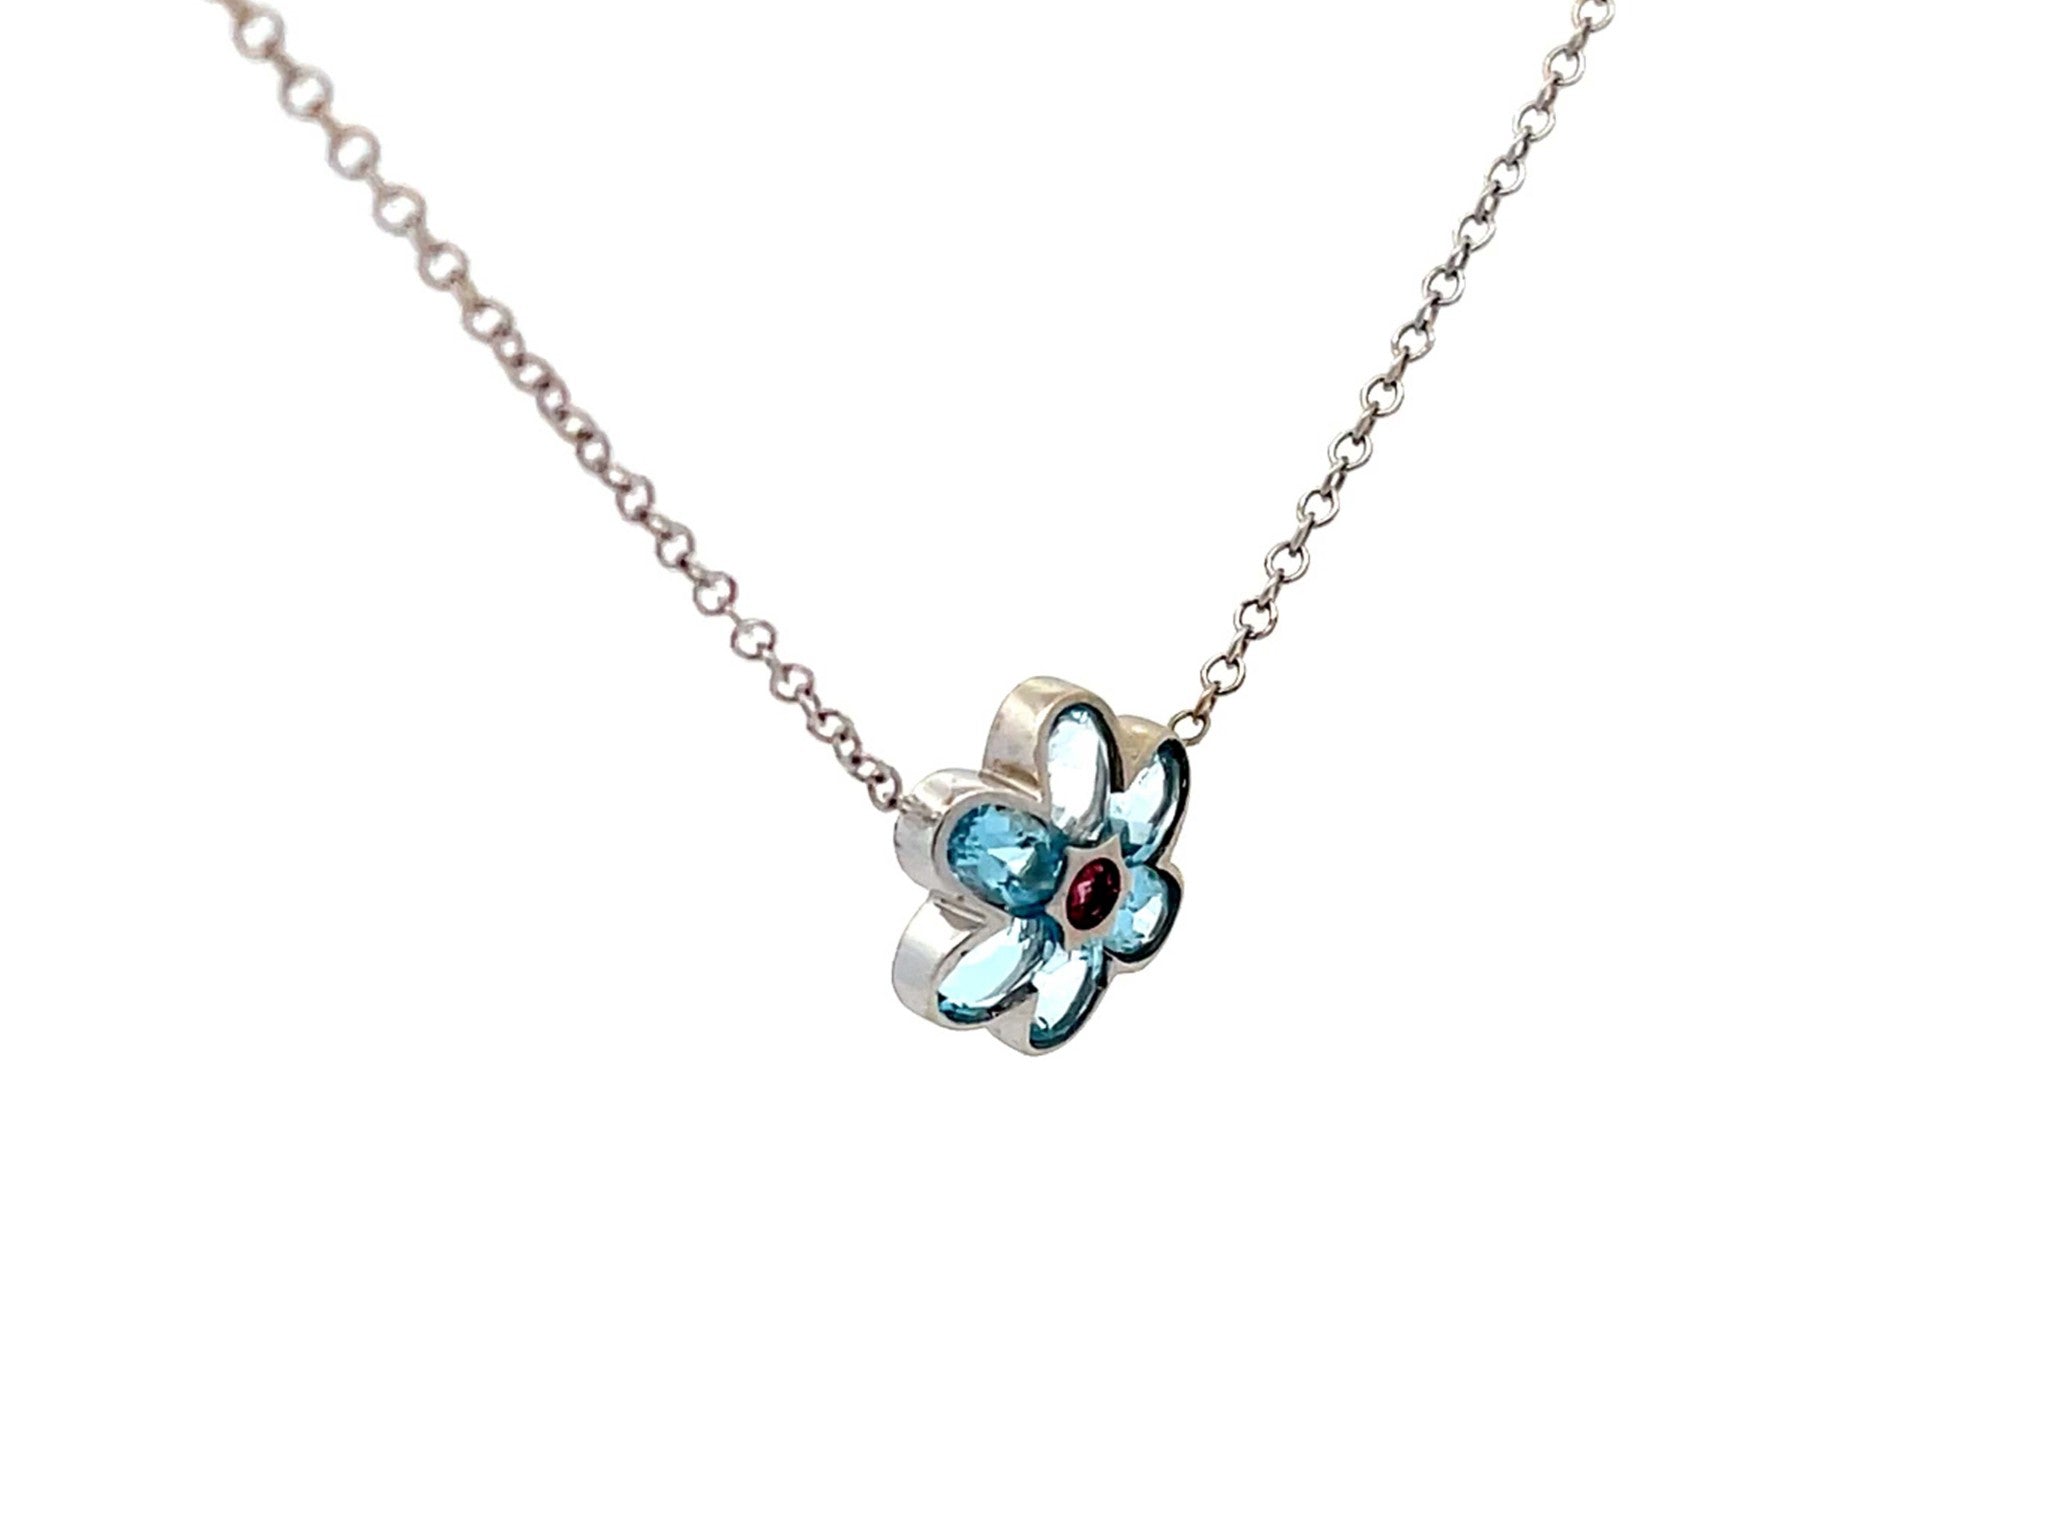 Blue Topaz and Pink Tourmaline Flower Necklace in 14k White Gold